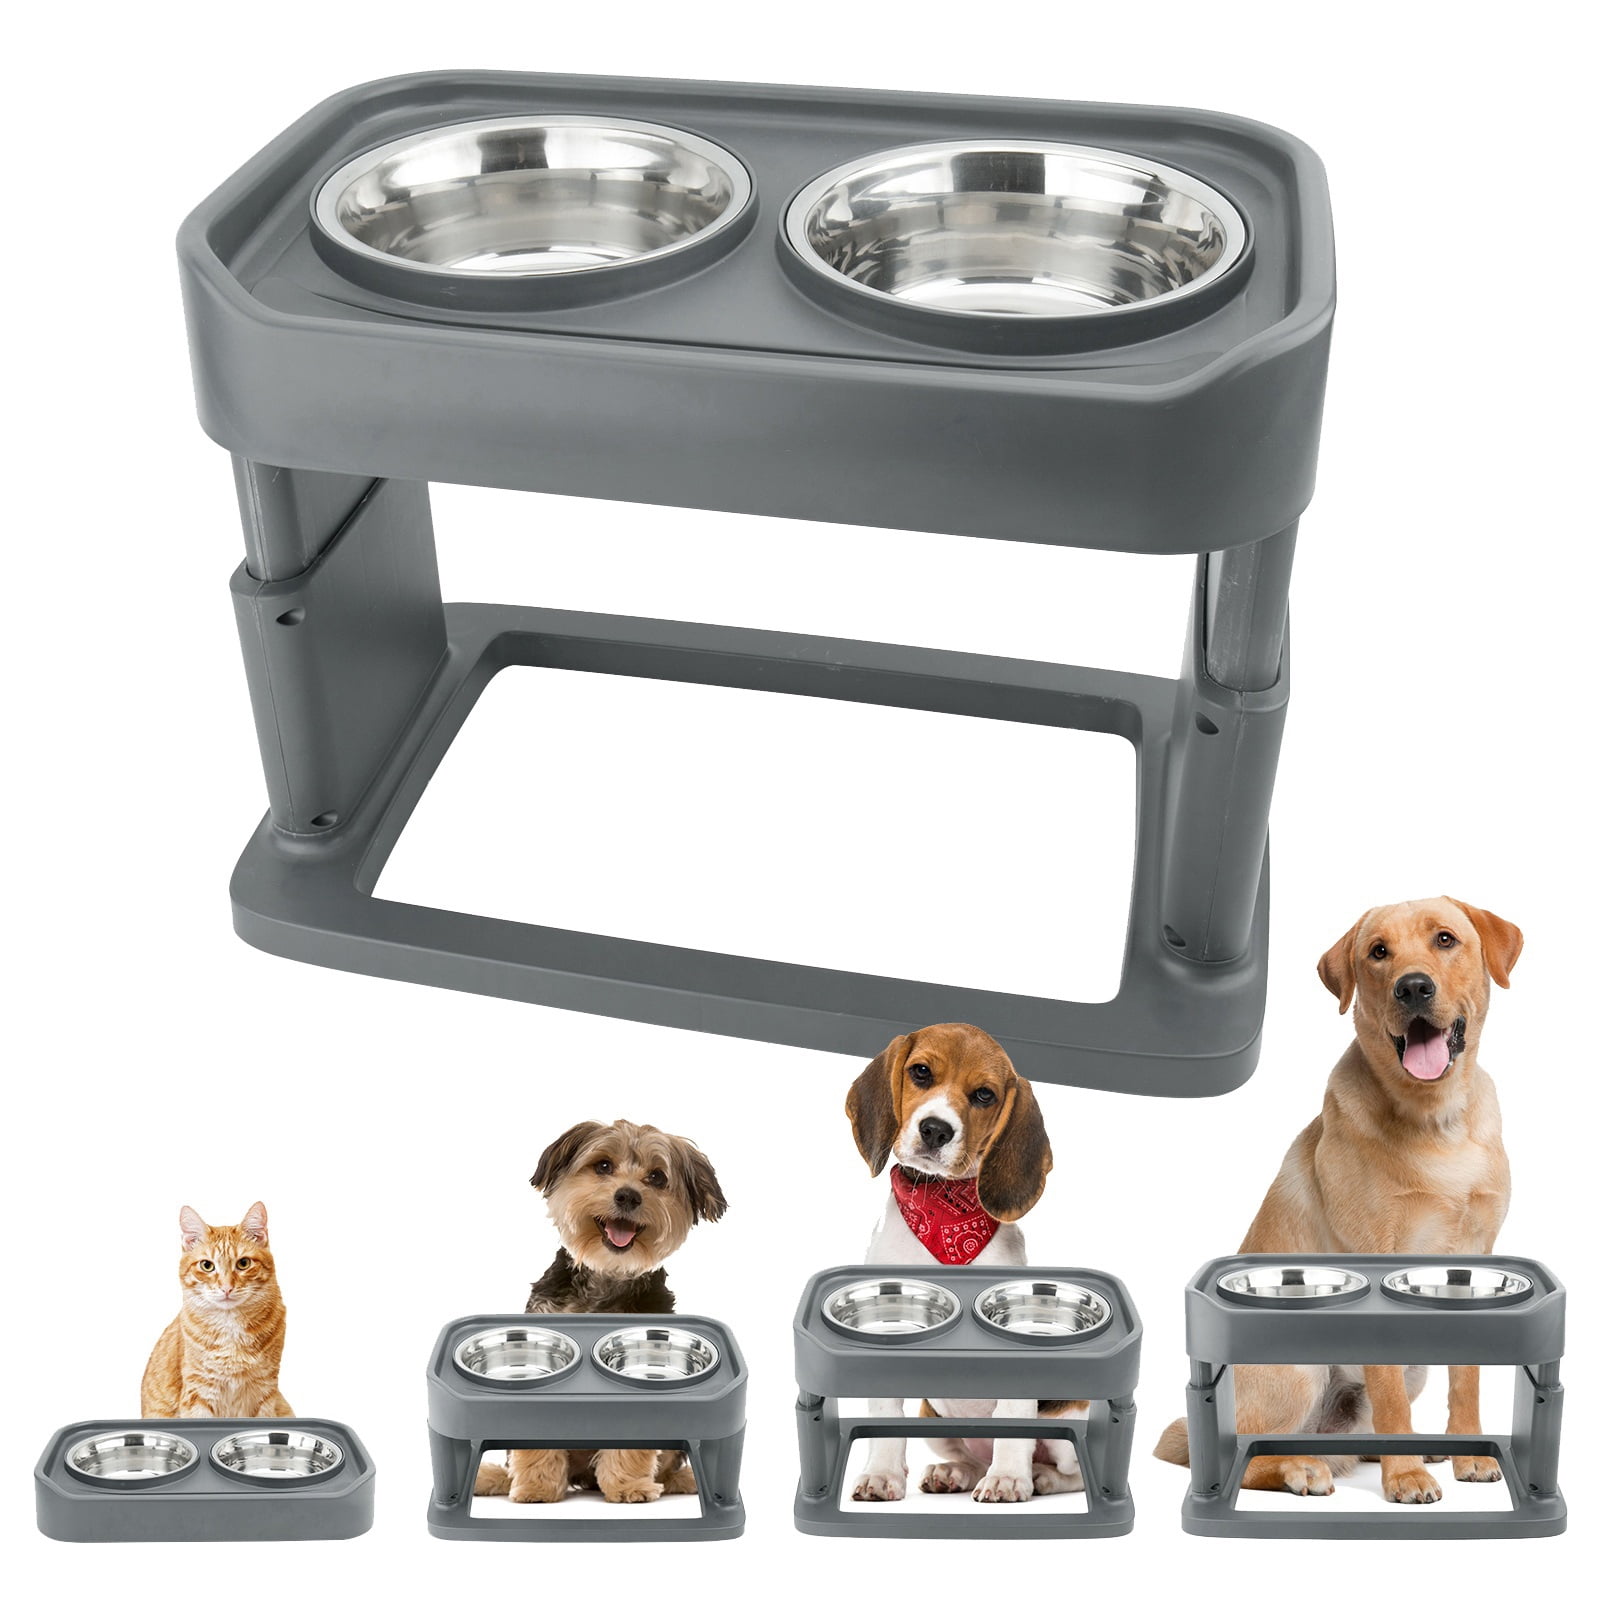 Keylever Elevated Raised Dog Bowls Stand, 4 Height Adjustable with